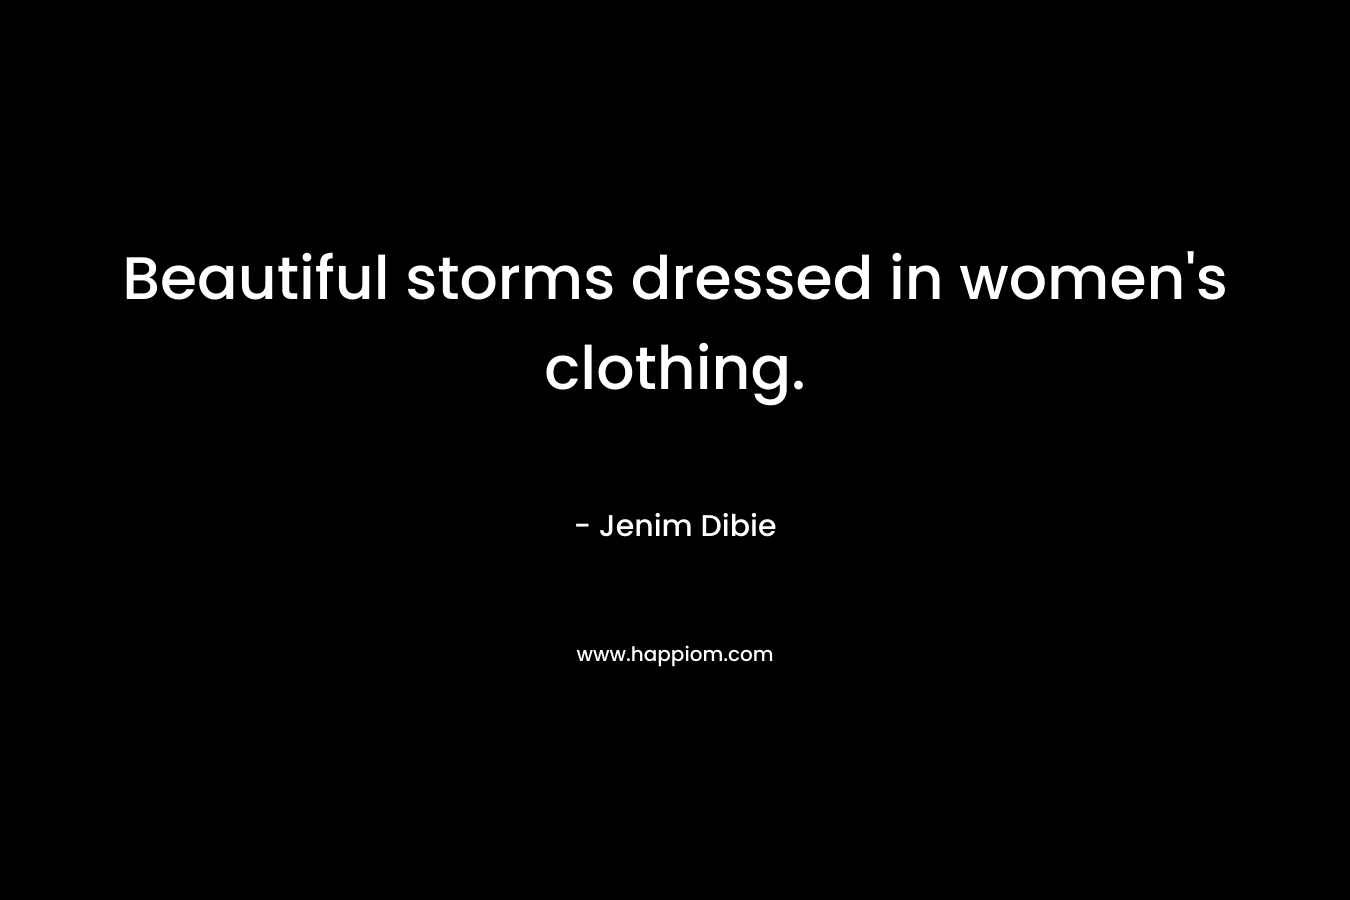 Beautiful storms dressed in women's clothing.